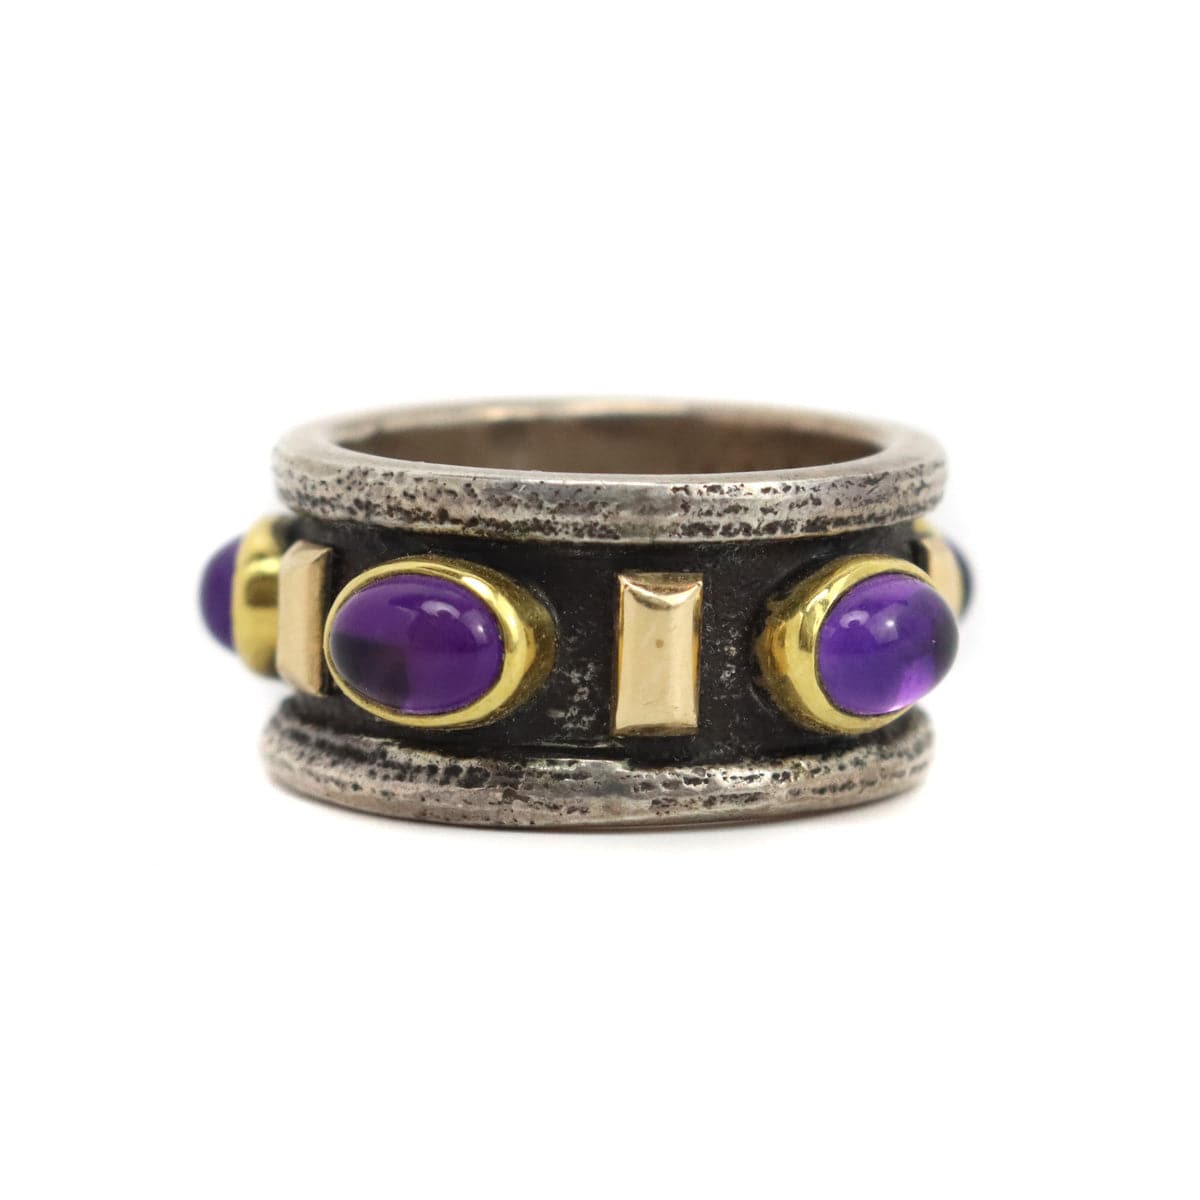 
Frank Patania Jr. - Amethyst and 14K Gold Ring, size 10 (J91699-0123-017) 1